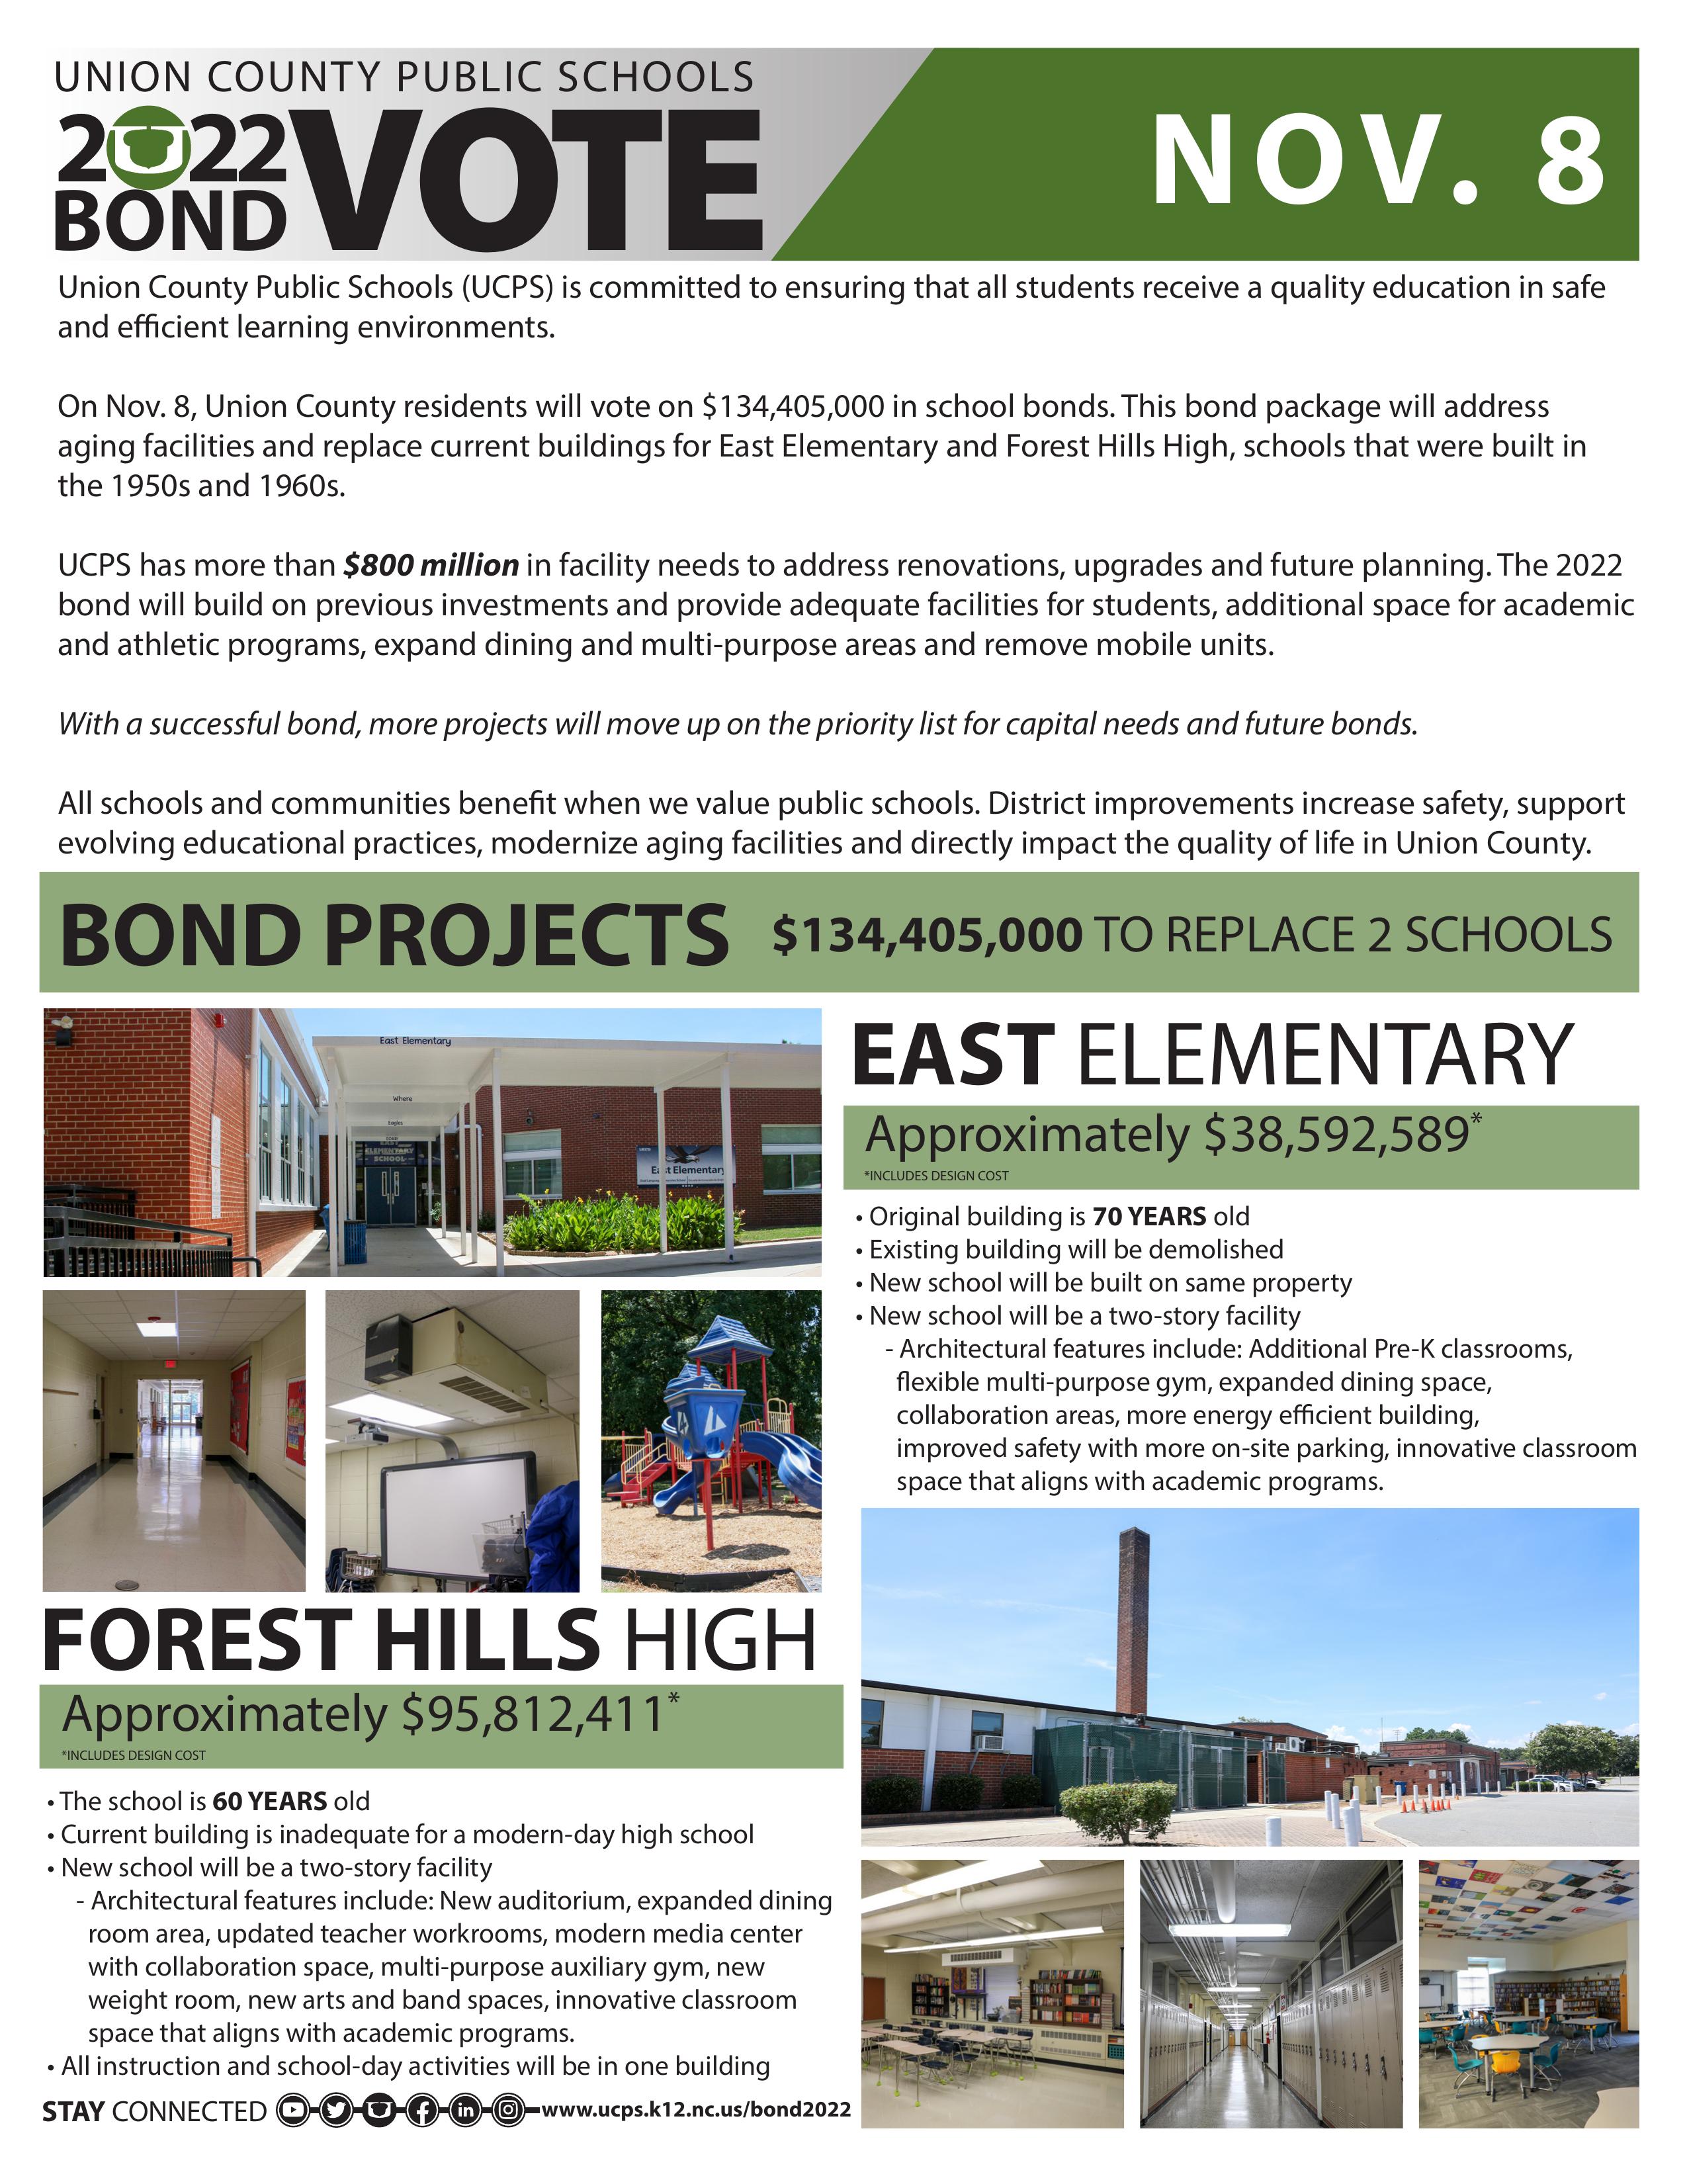 UCPS Bond Campaign Overview